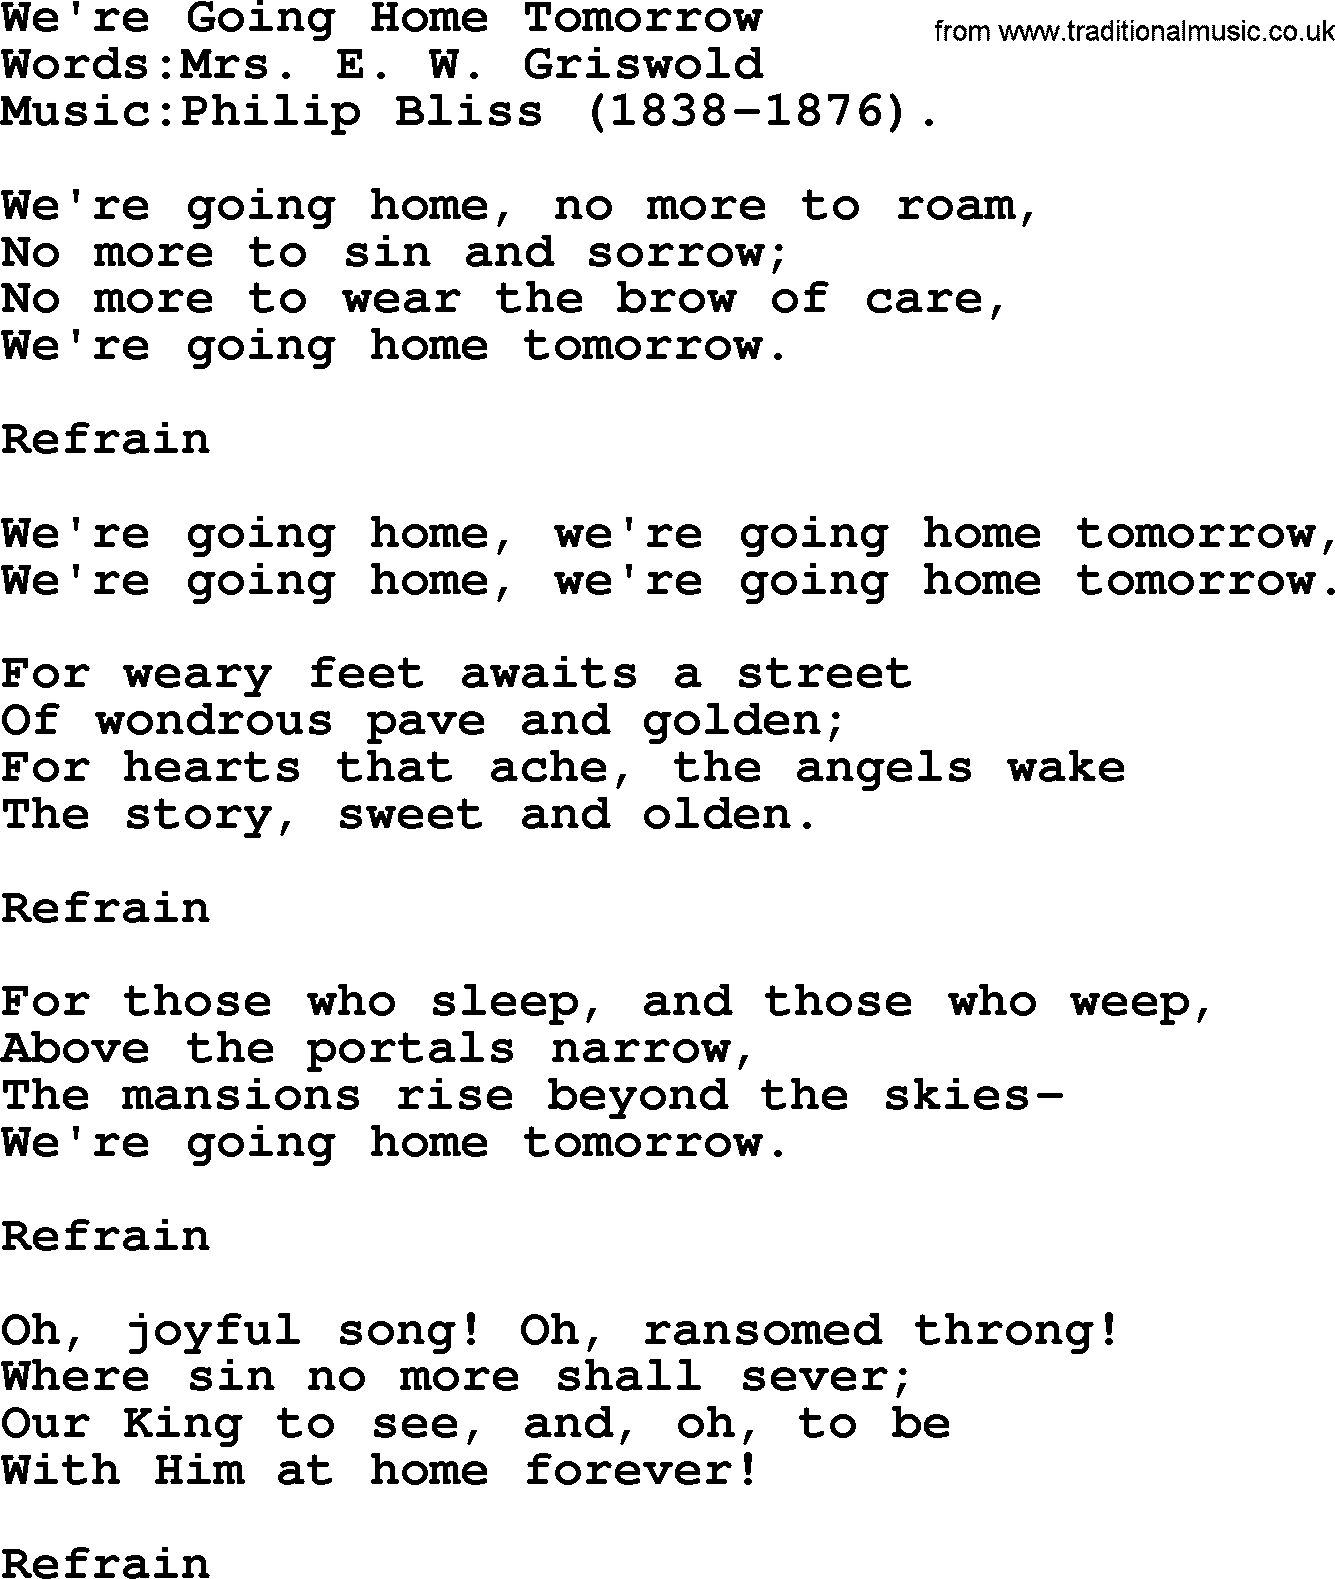 Songs and Hymns about Heaven: We're Going Home Tomorrow lyrics with PDF